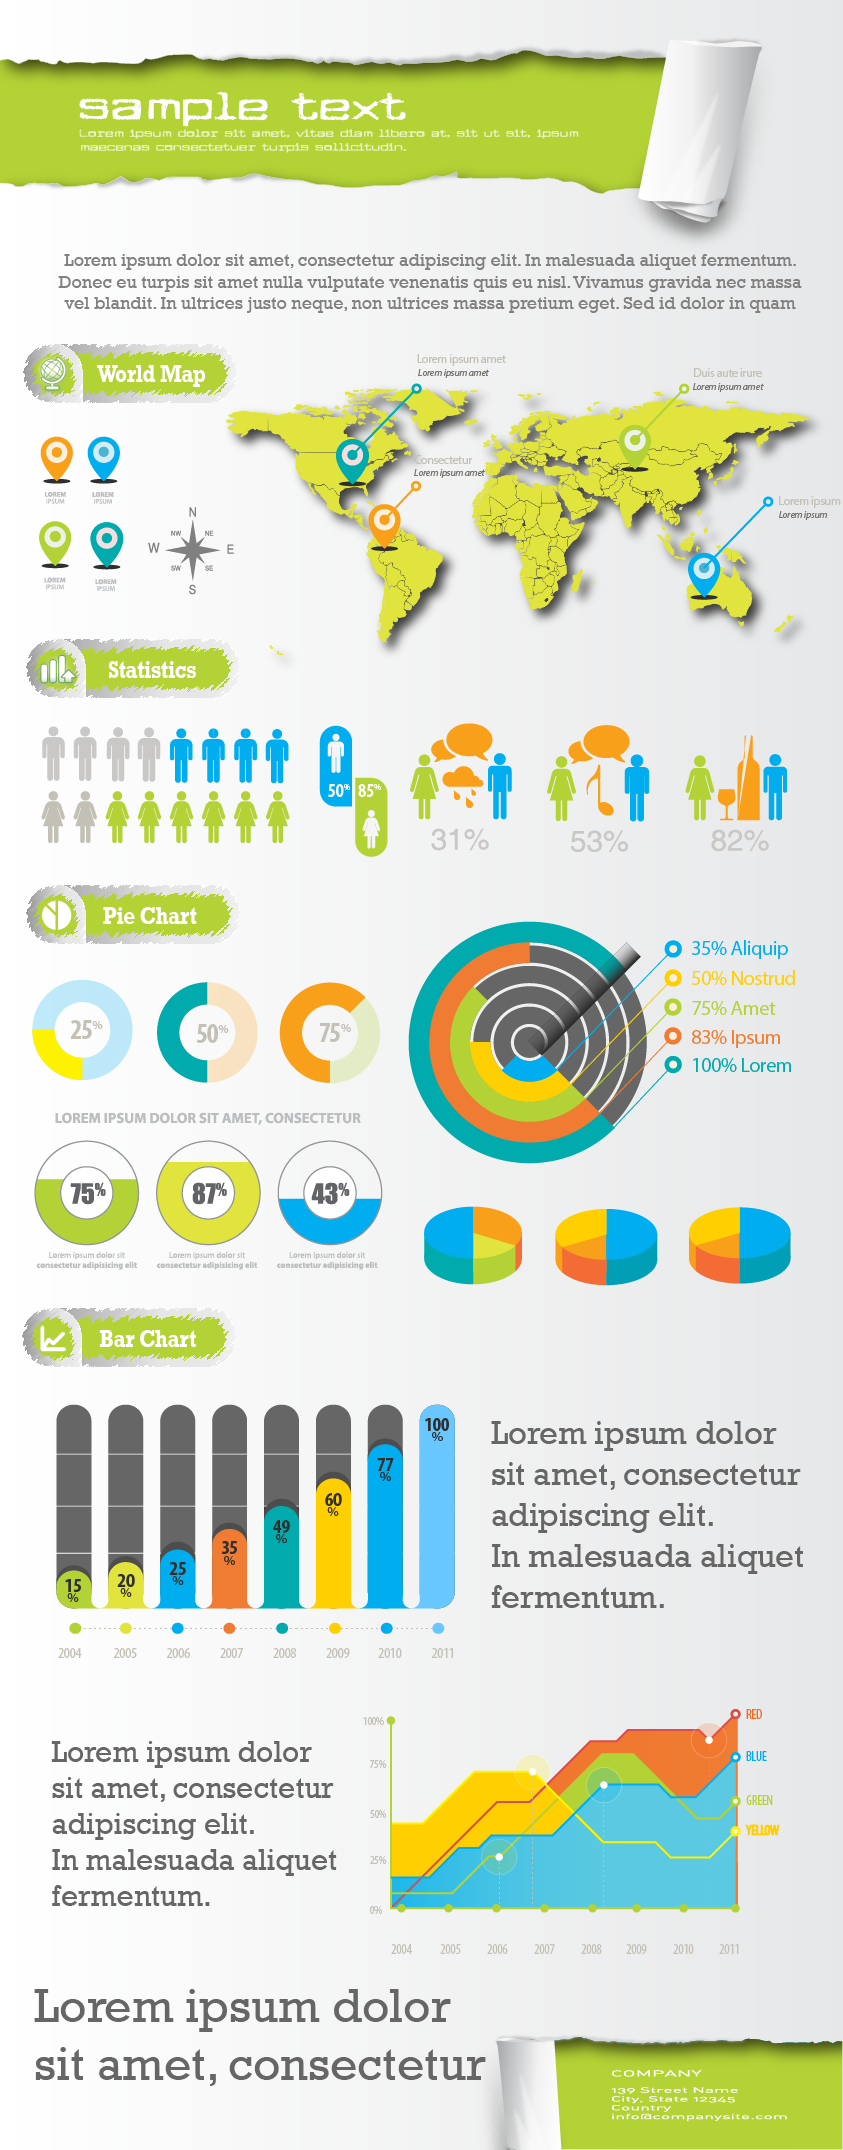 How to Create Infographics in Under an Hour [15 Free Infographic Templates]